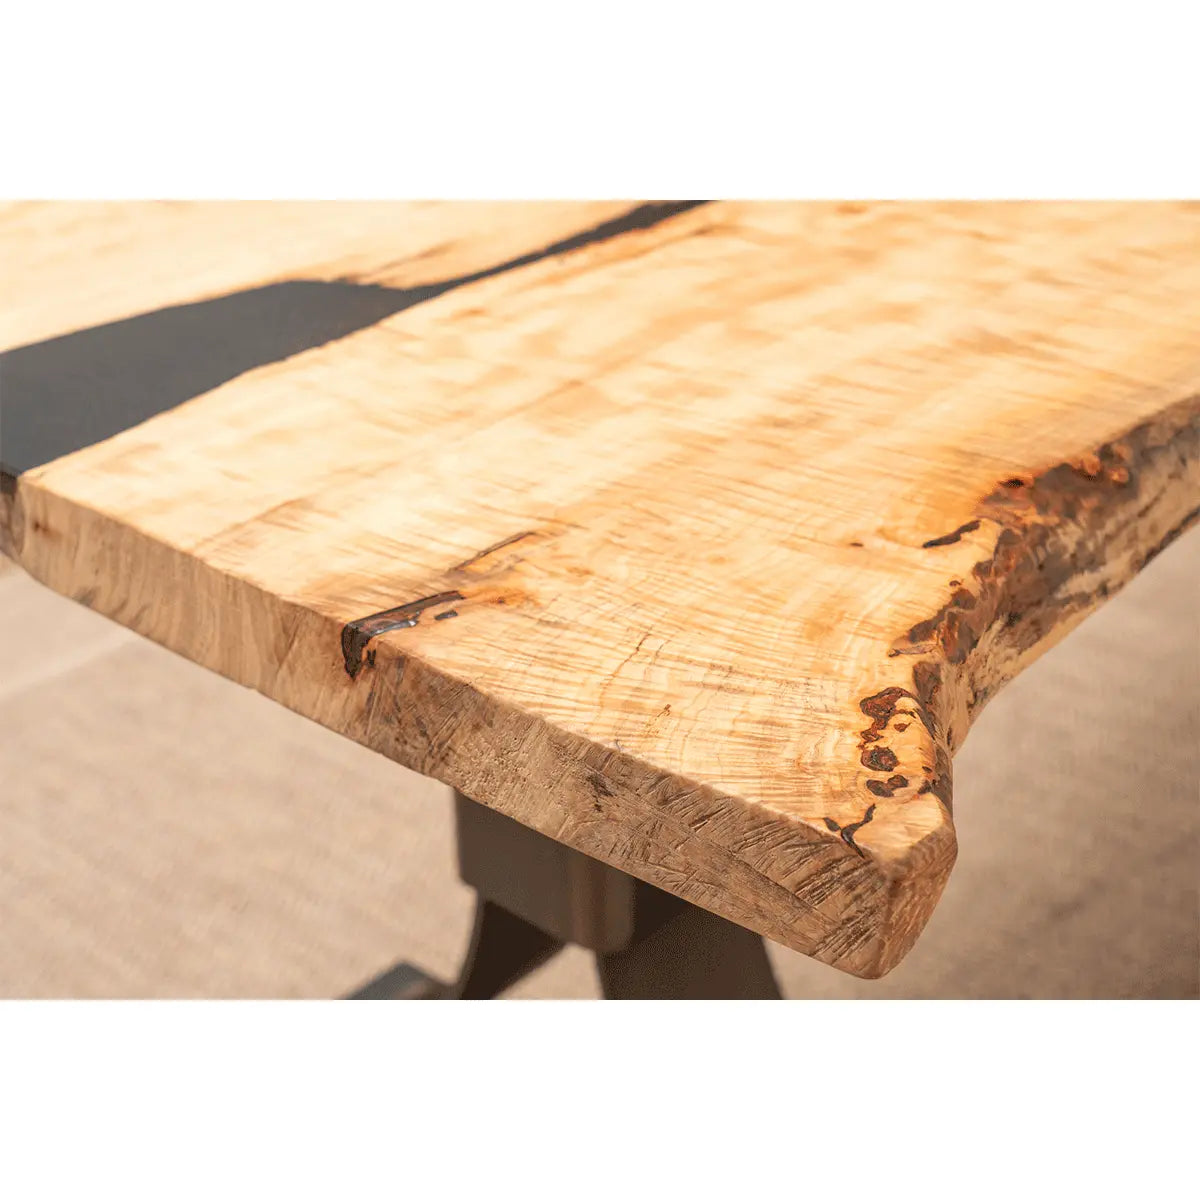 Live Edge Curly Maple Dining Table 93" Close Up Detalis